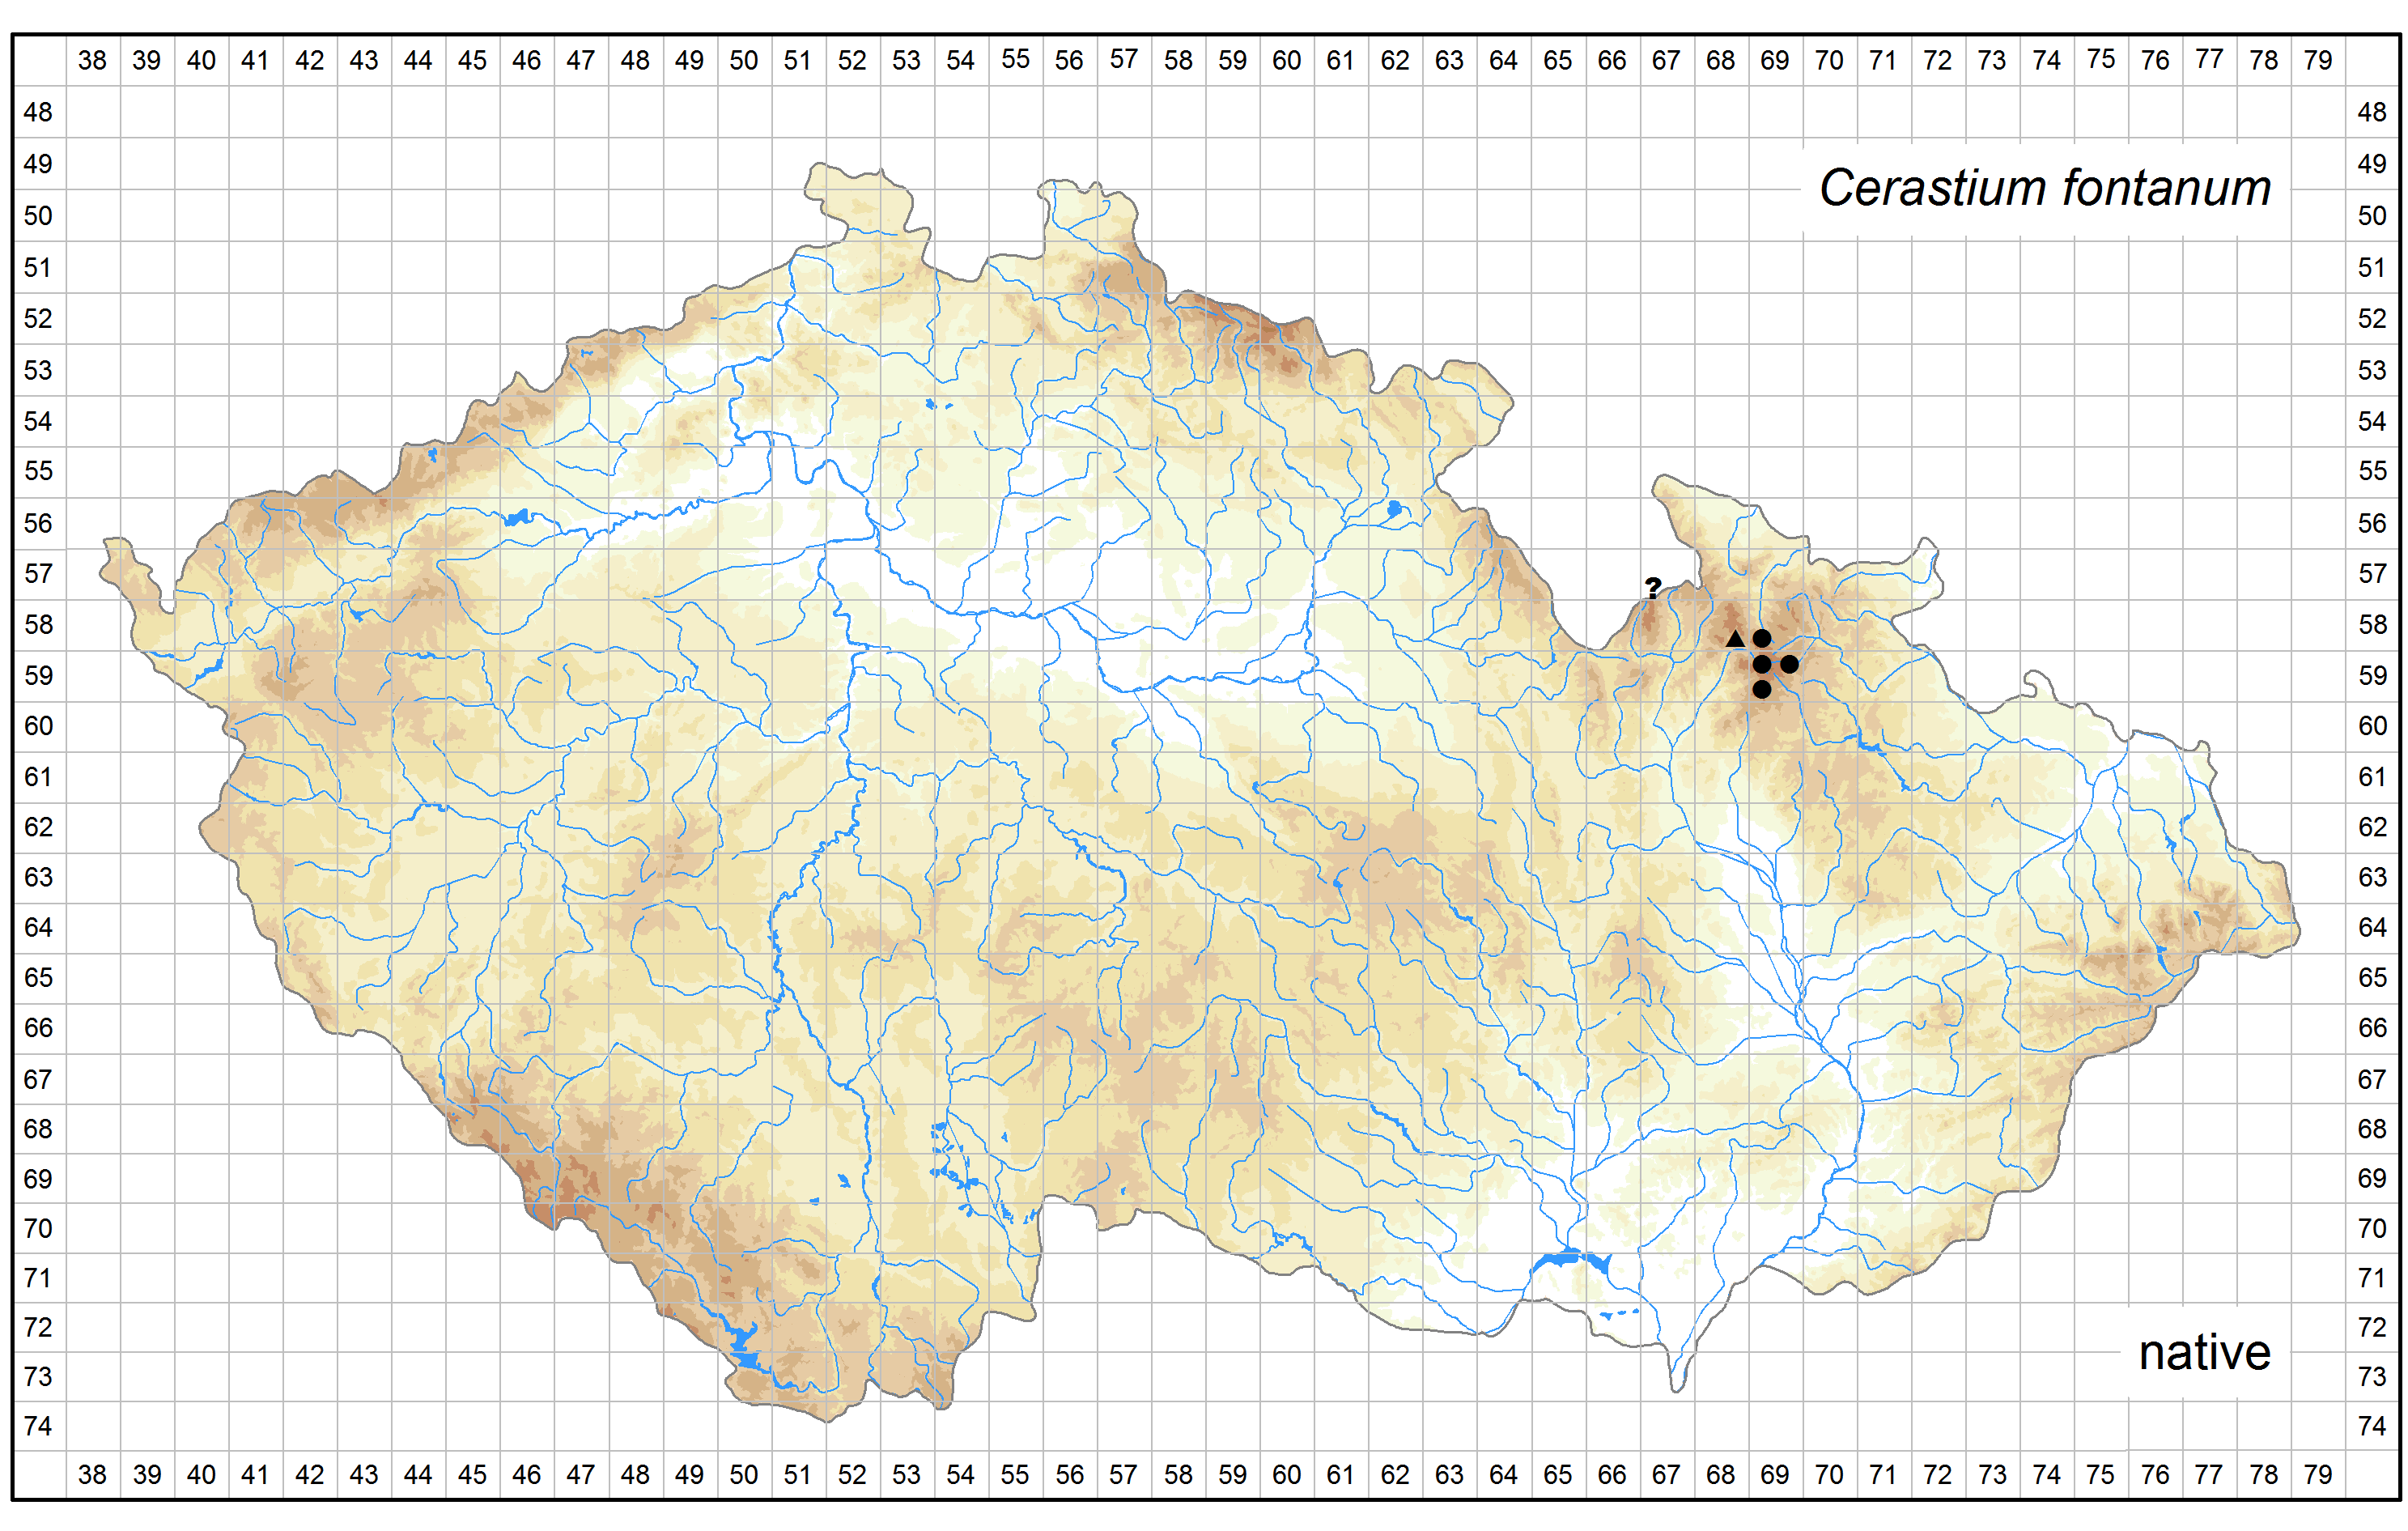 Distribution of Cerastium fontanum in the Czech Republic Author of the map: Jiří Danihelka Map produced on: 11-11-2016 Database records used for producing the distribution map of Cerastium fontanum